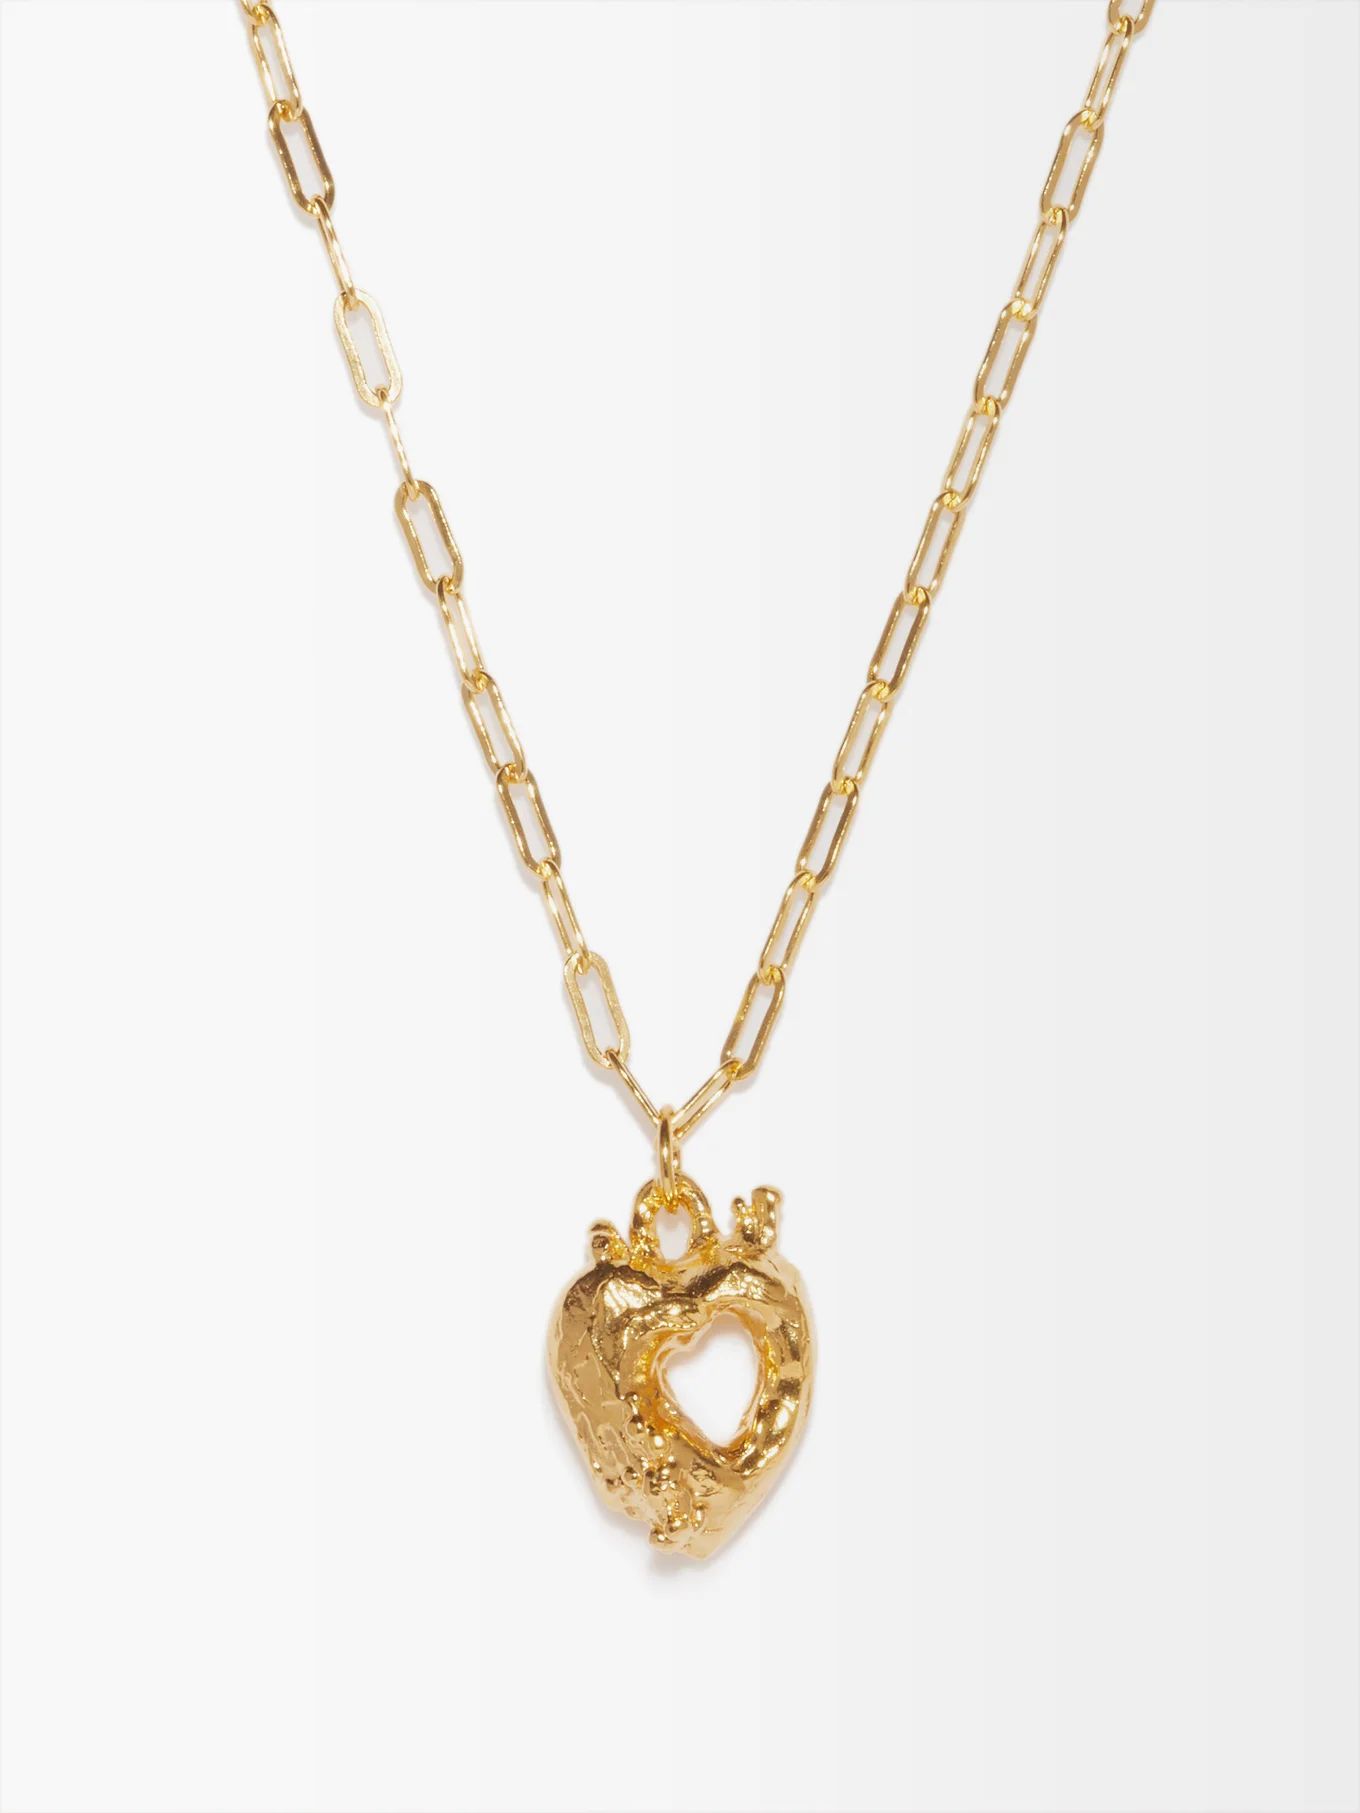 The Lover's Pact 24kt gold-plated necklace | Alighieri | Matches (UK)